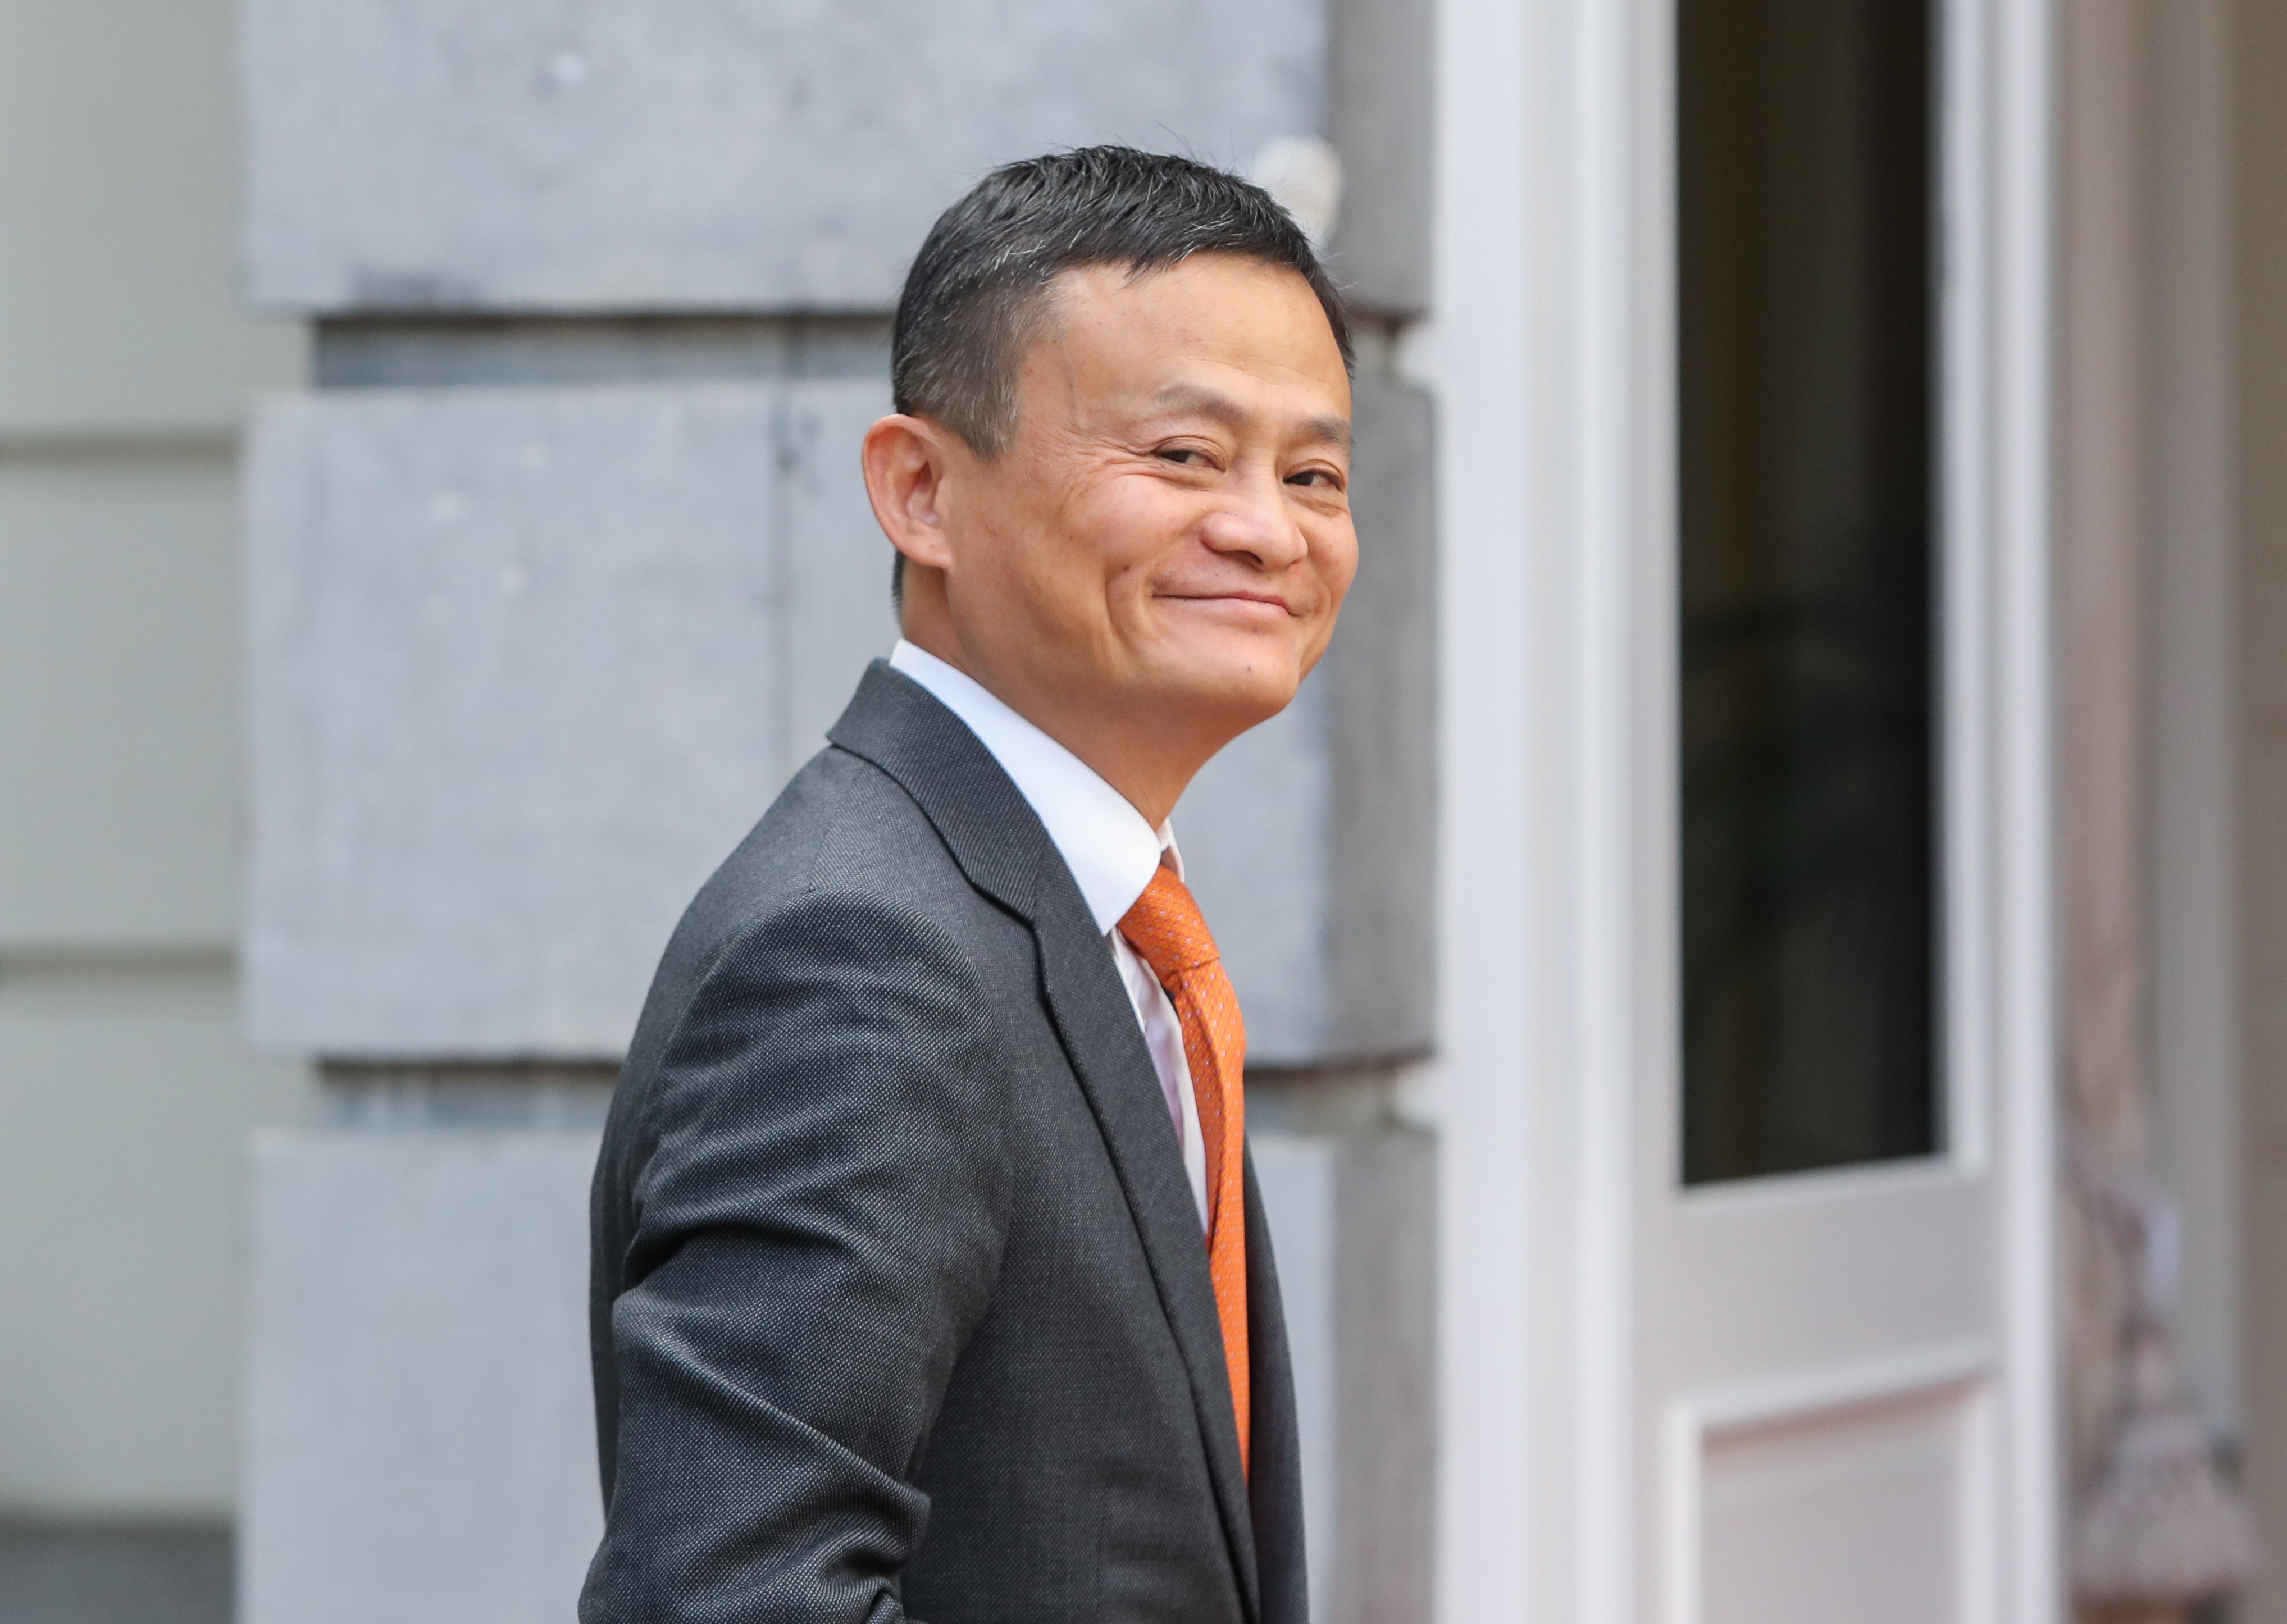 Ma will remain executive chairman while the plan is carried out. A New York Times report that said he was “stepping down” to “retire” was out of context, and factually wrong, an Alibaba spokesman said